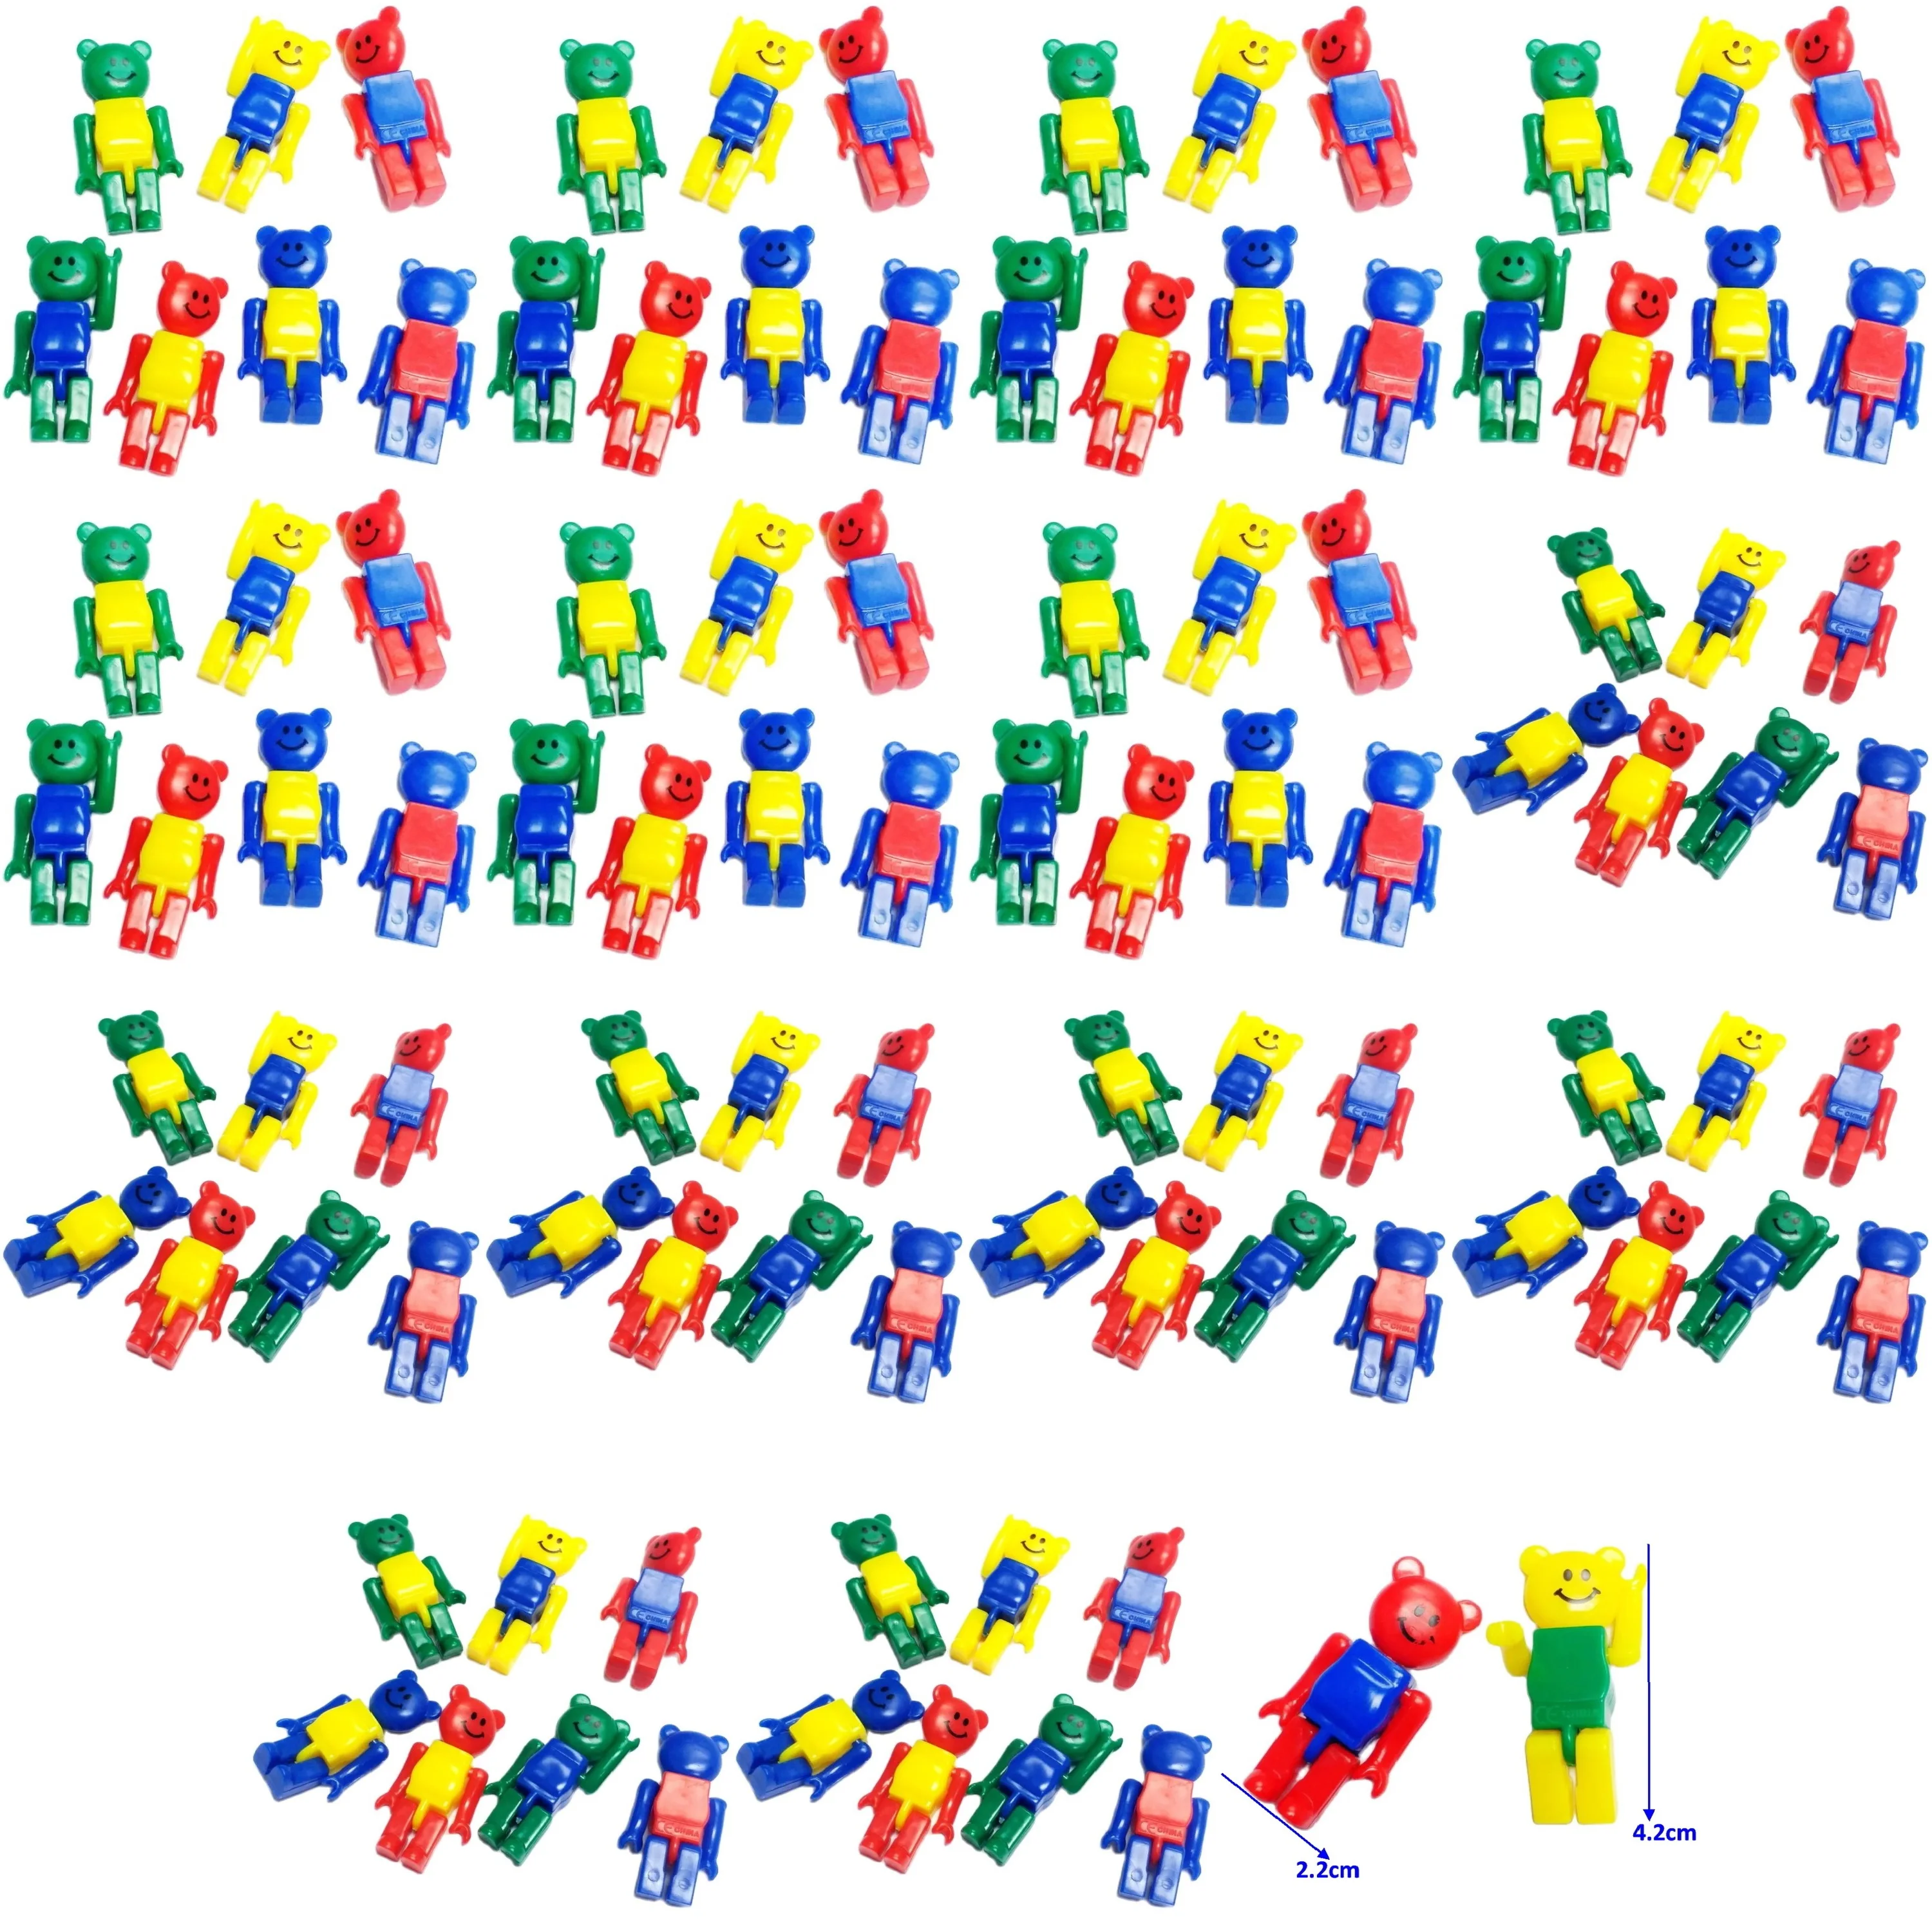 

99 Piece Plastic 4.2cm Litter Bear Figure Kids Toys Novelty Party Favors Gift Lucky Pinata Easter Birthday School Prize